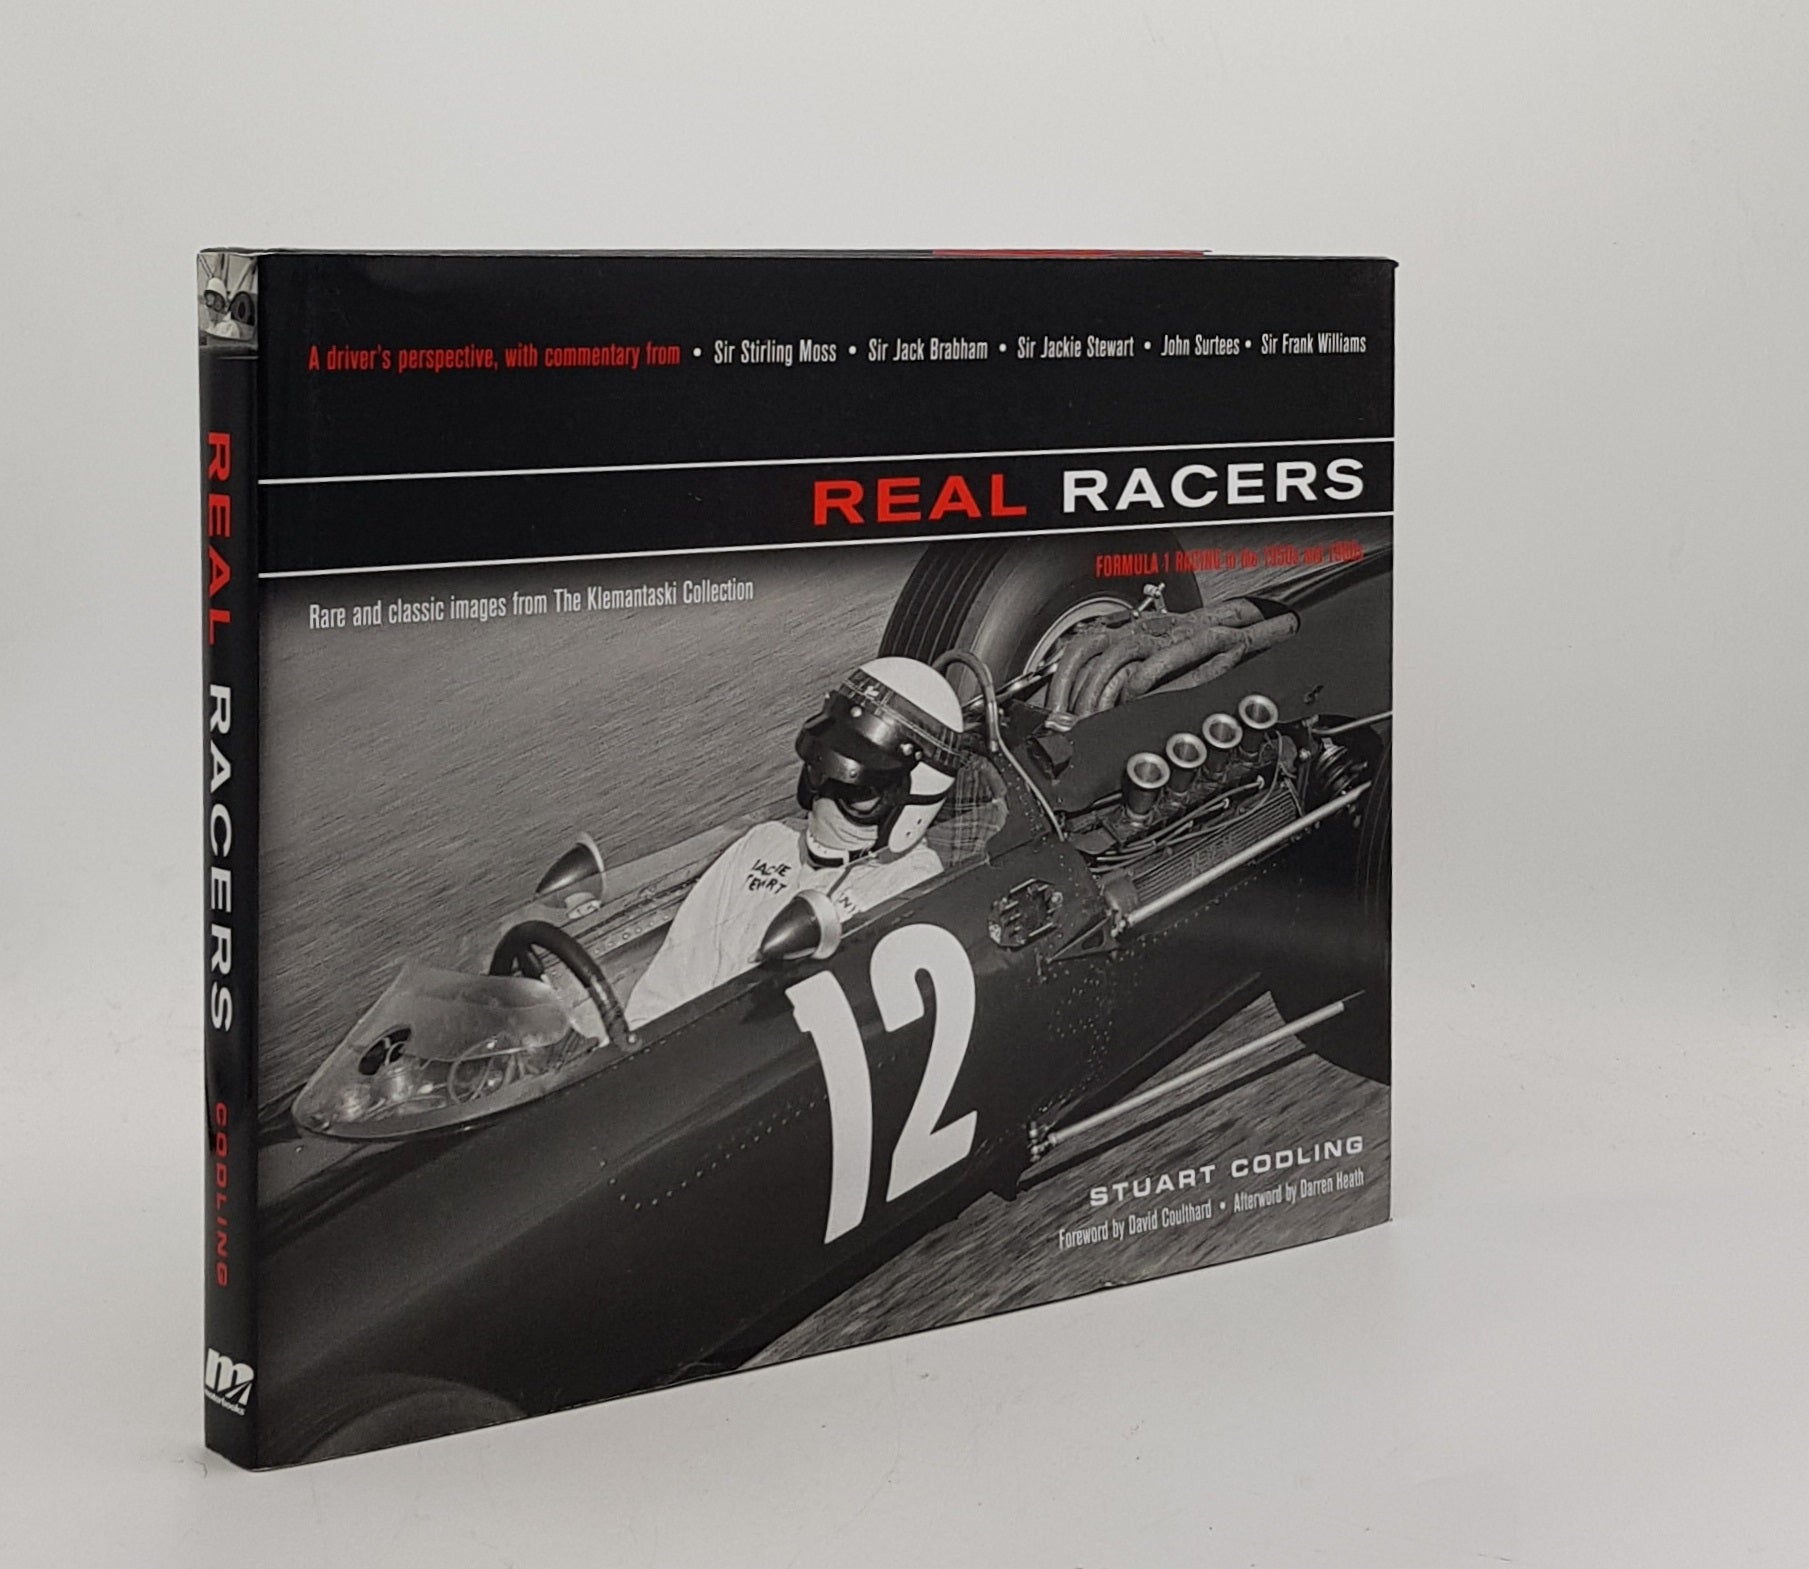 CODLING Stuart - Real Racers Formula 1 in the 1950s and 1960s a Driver's Perspective